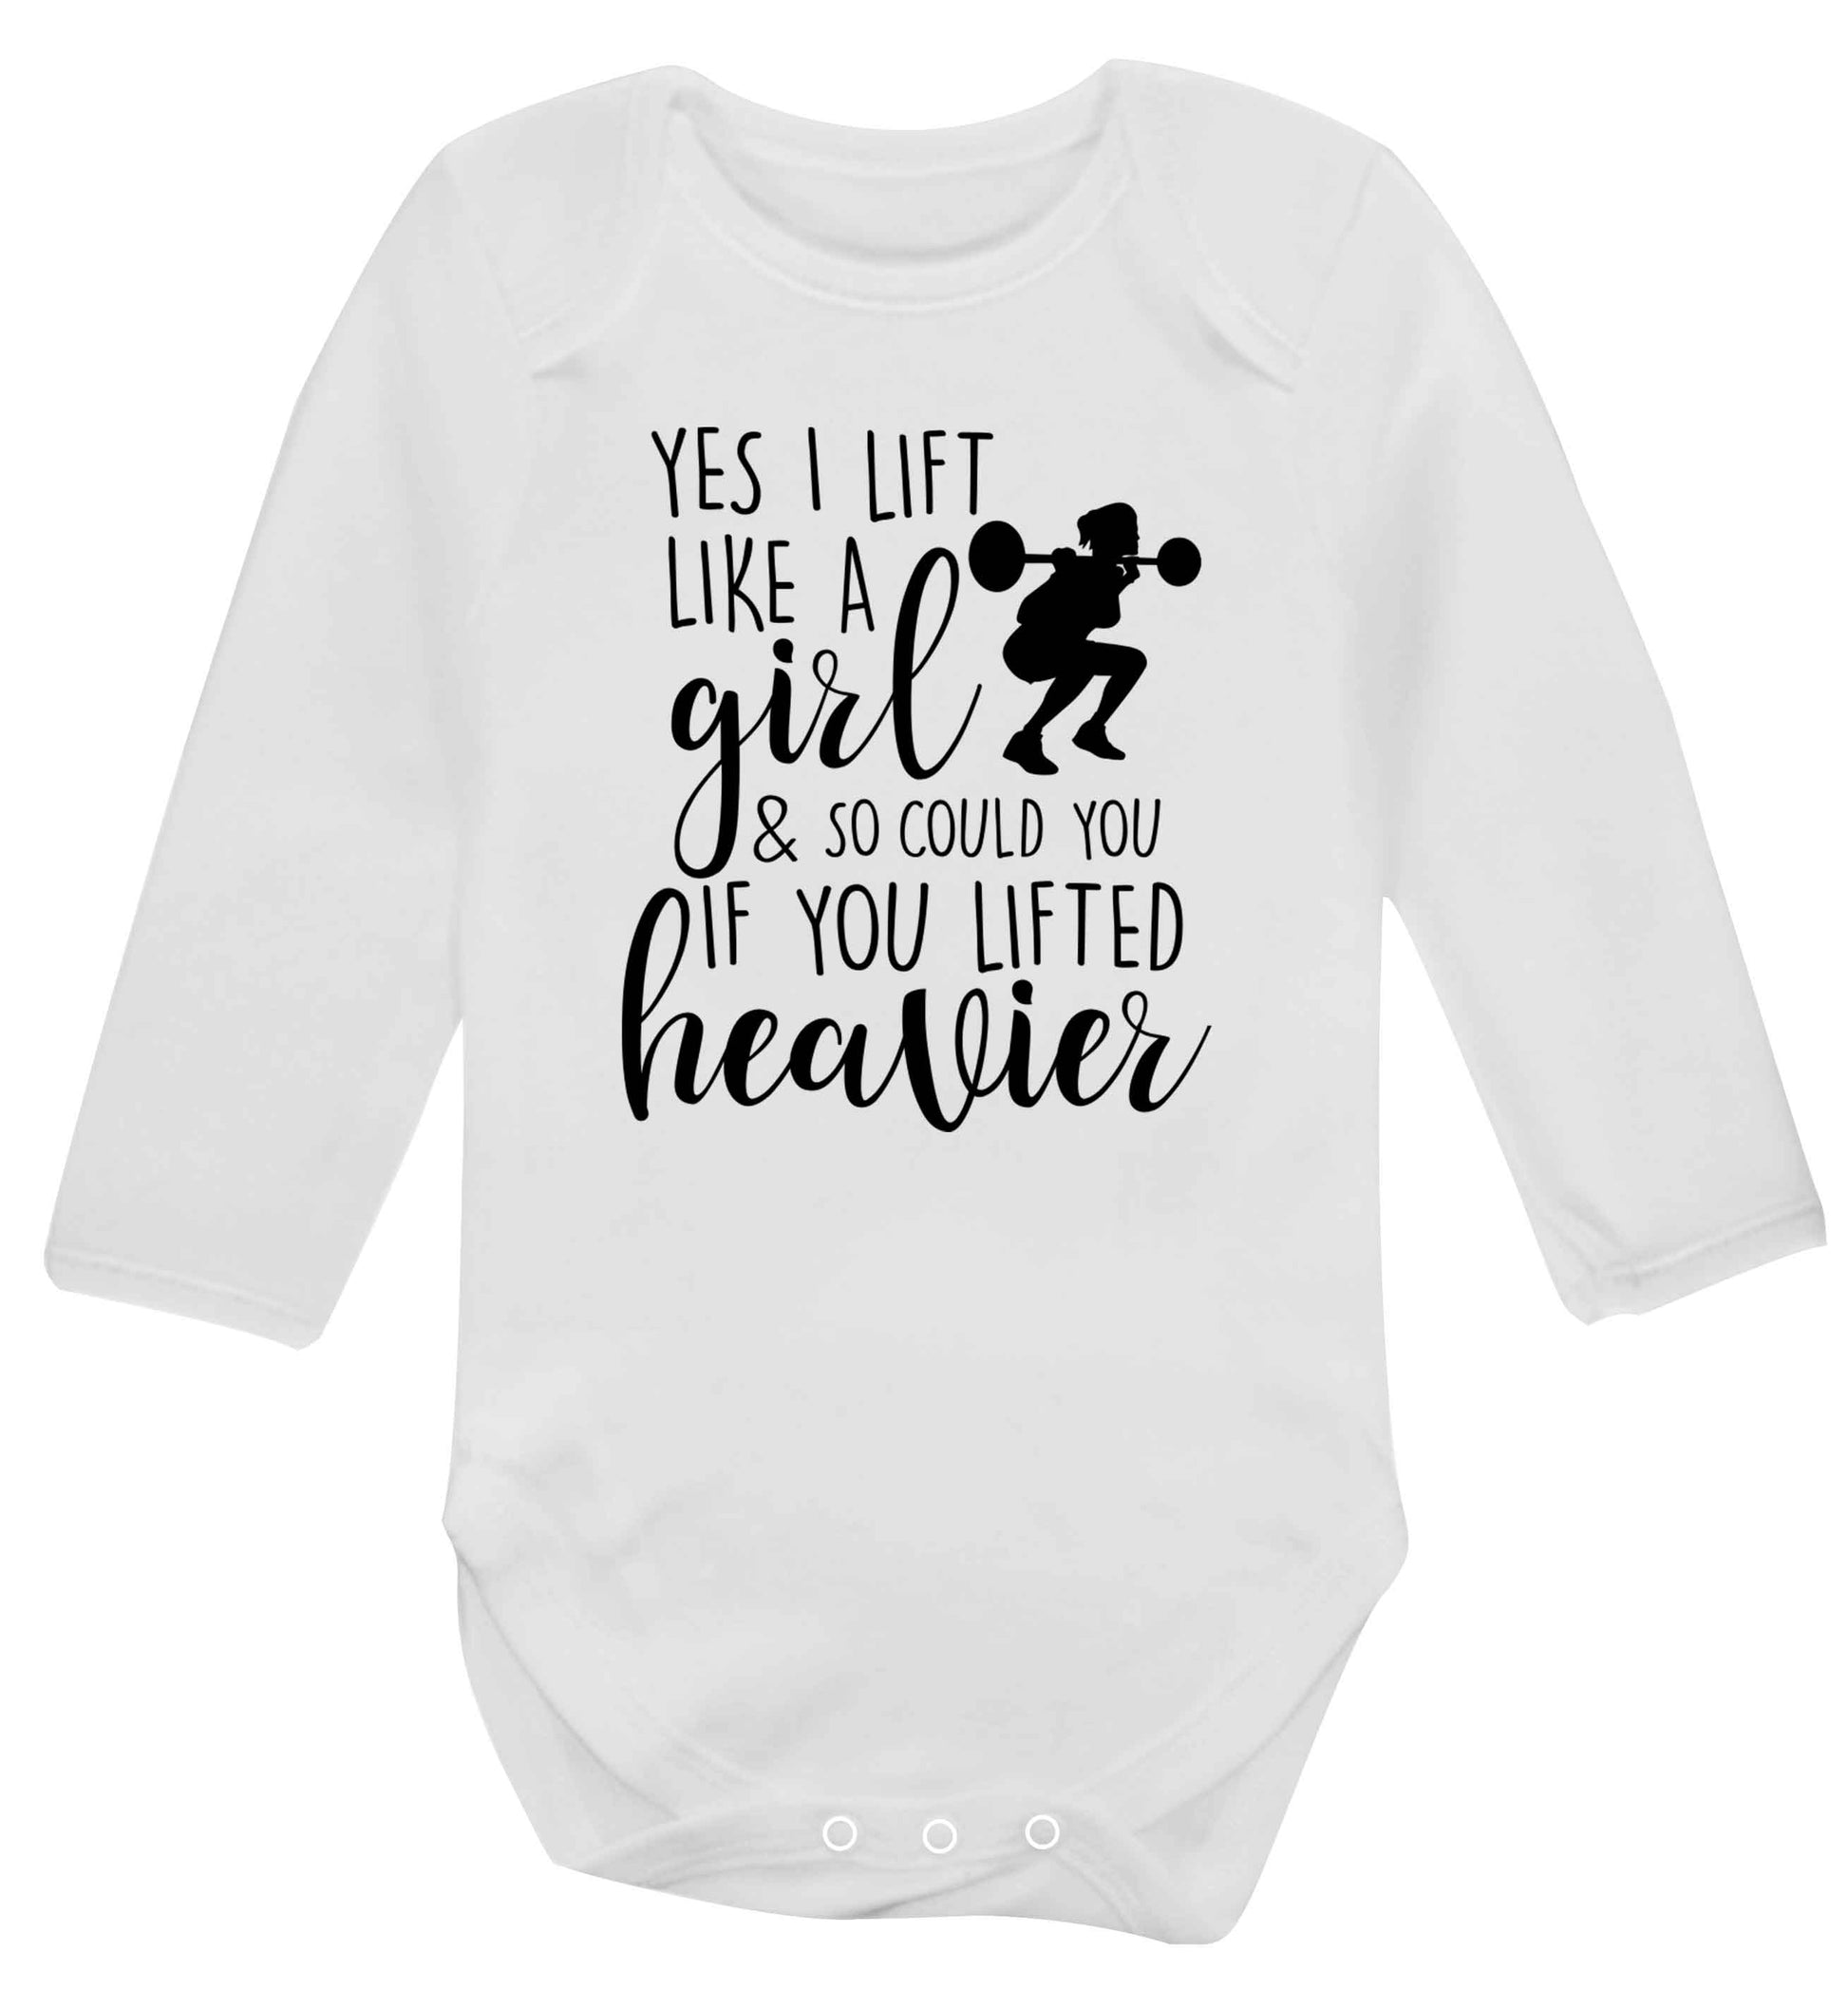 Yes I lift like a girl and so could you if you lifted heavier Baby Vest long sleeved white 6-12 months